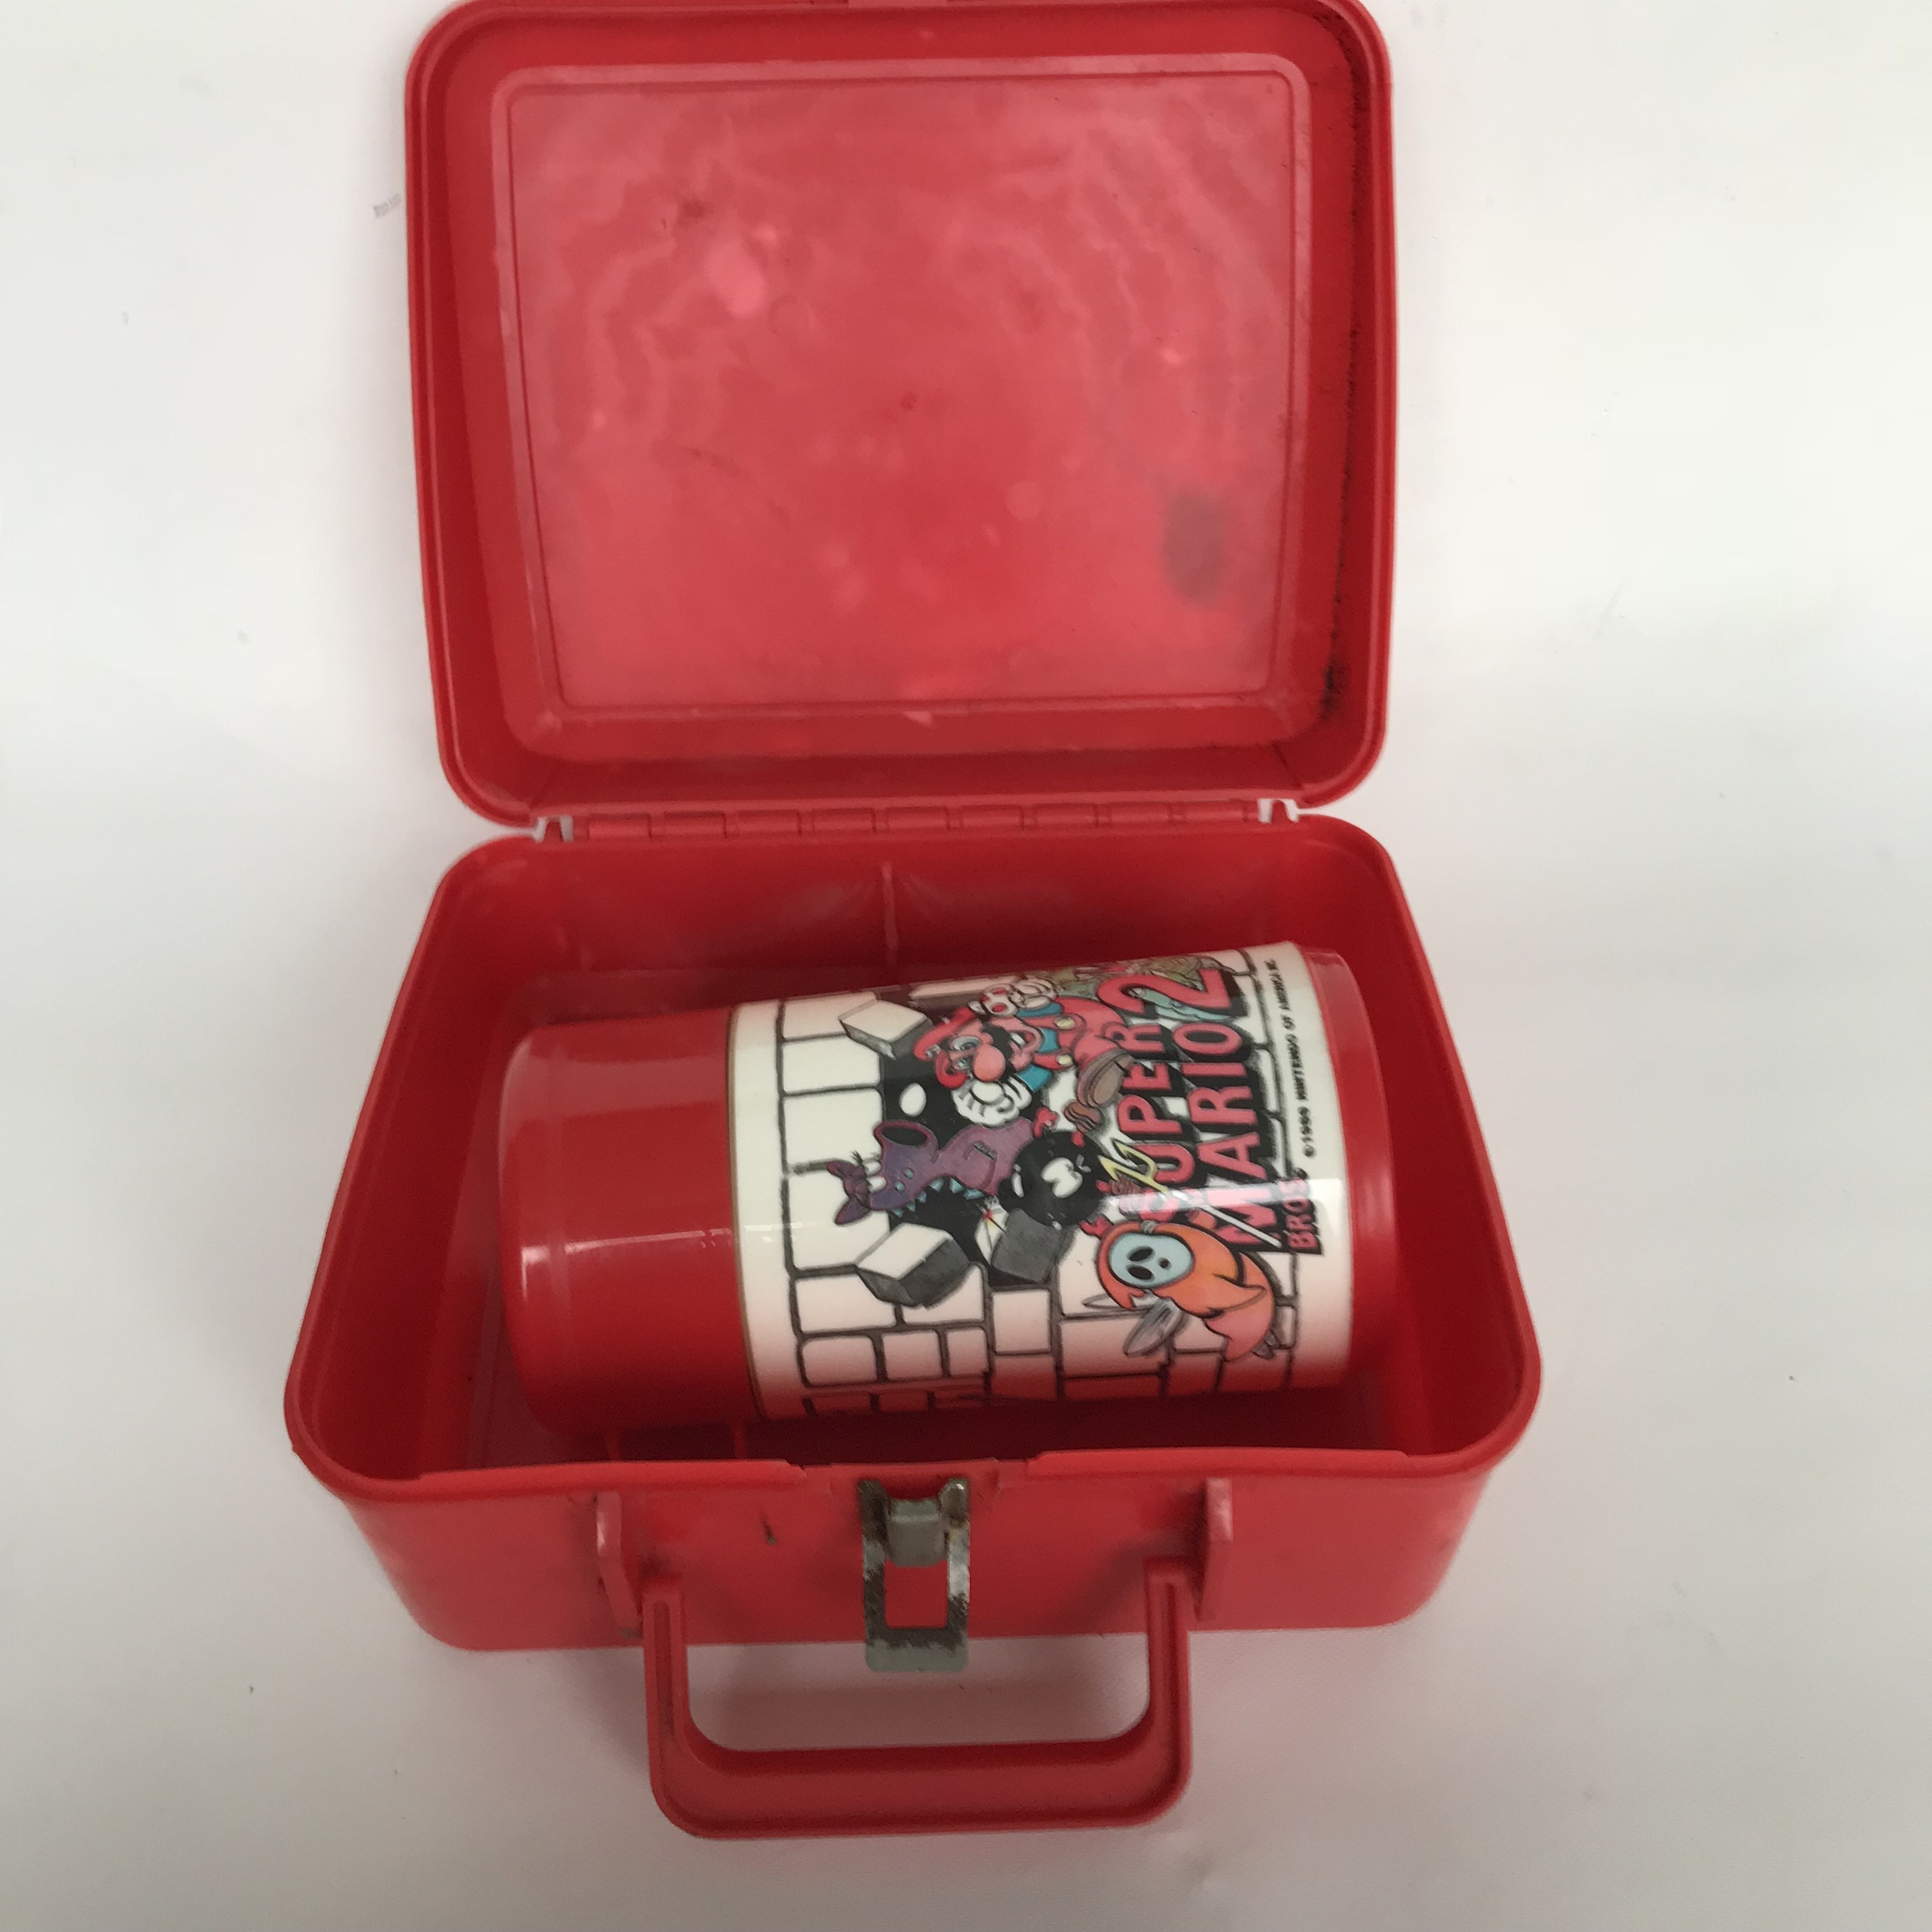 Sold at Auction: 1988 Nintendo Super Mario Bros Lunch Box with